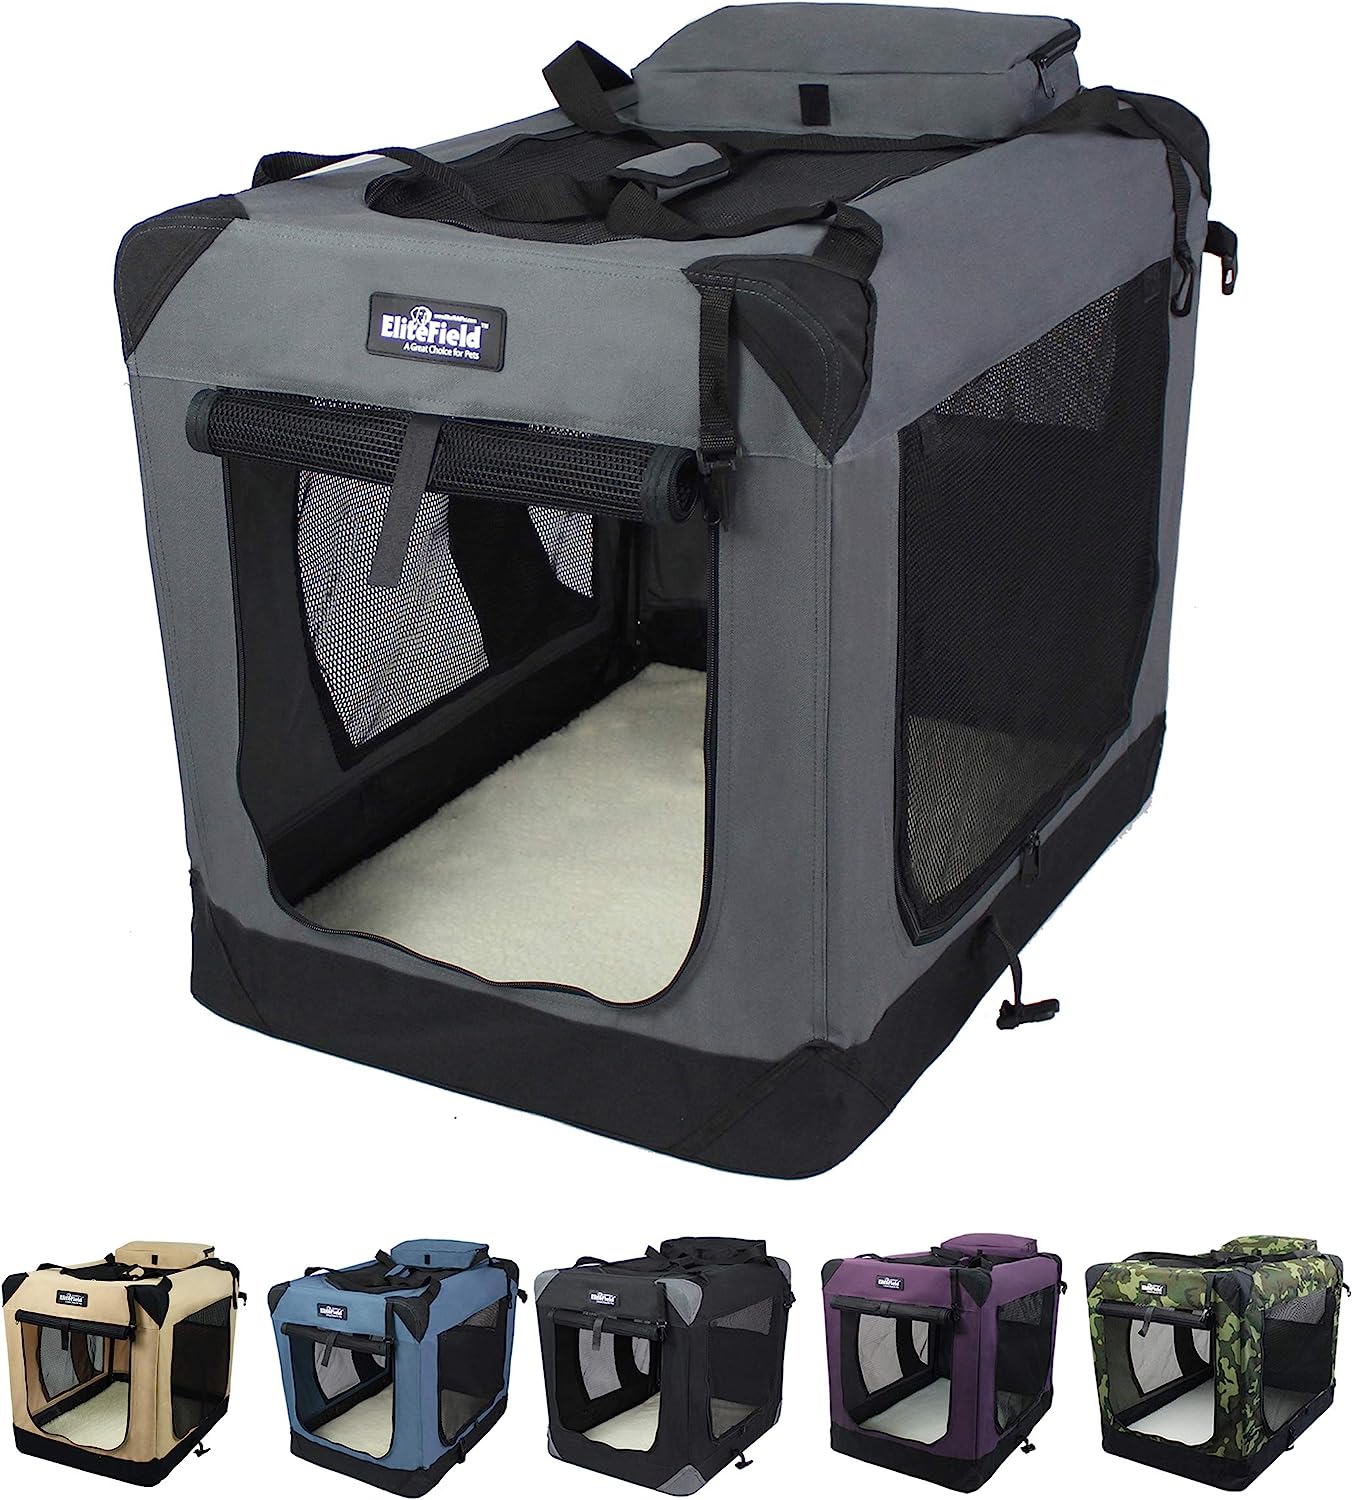 Elitefield 3-Door Soft-Sided Dog Crate